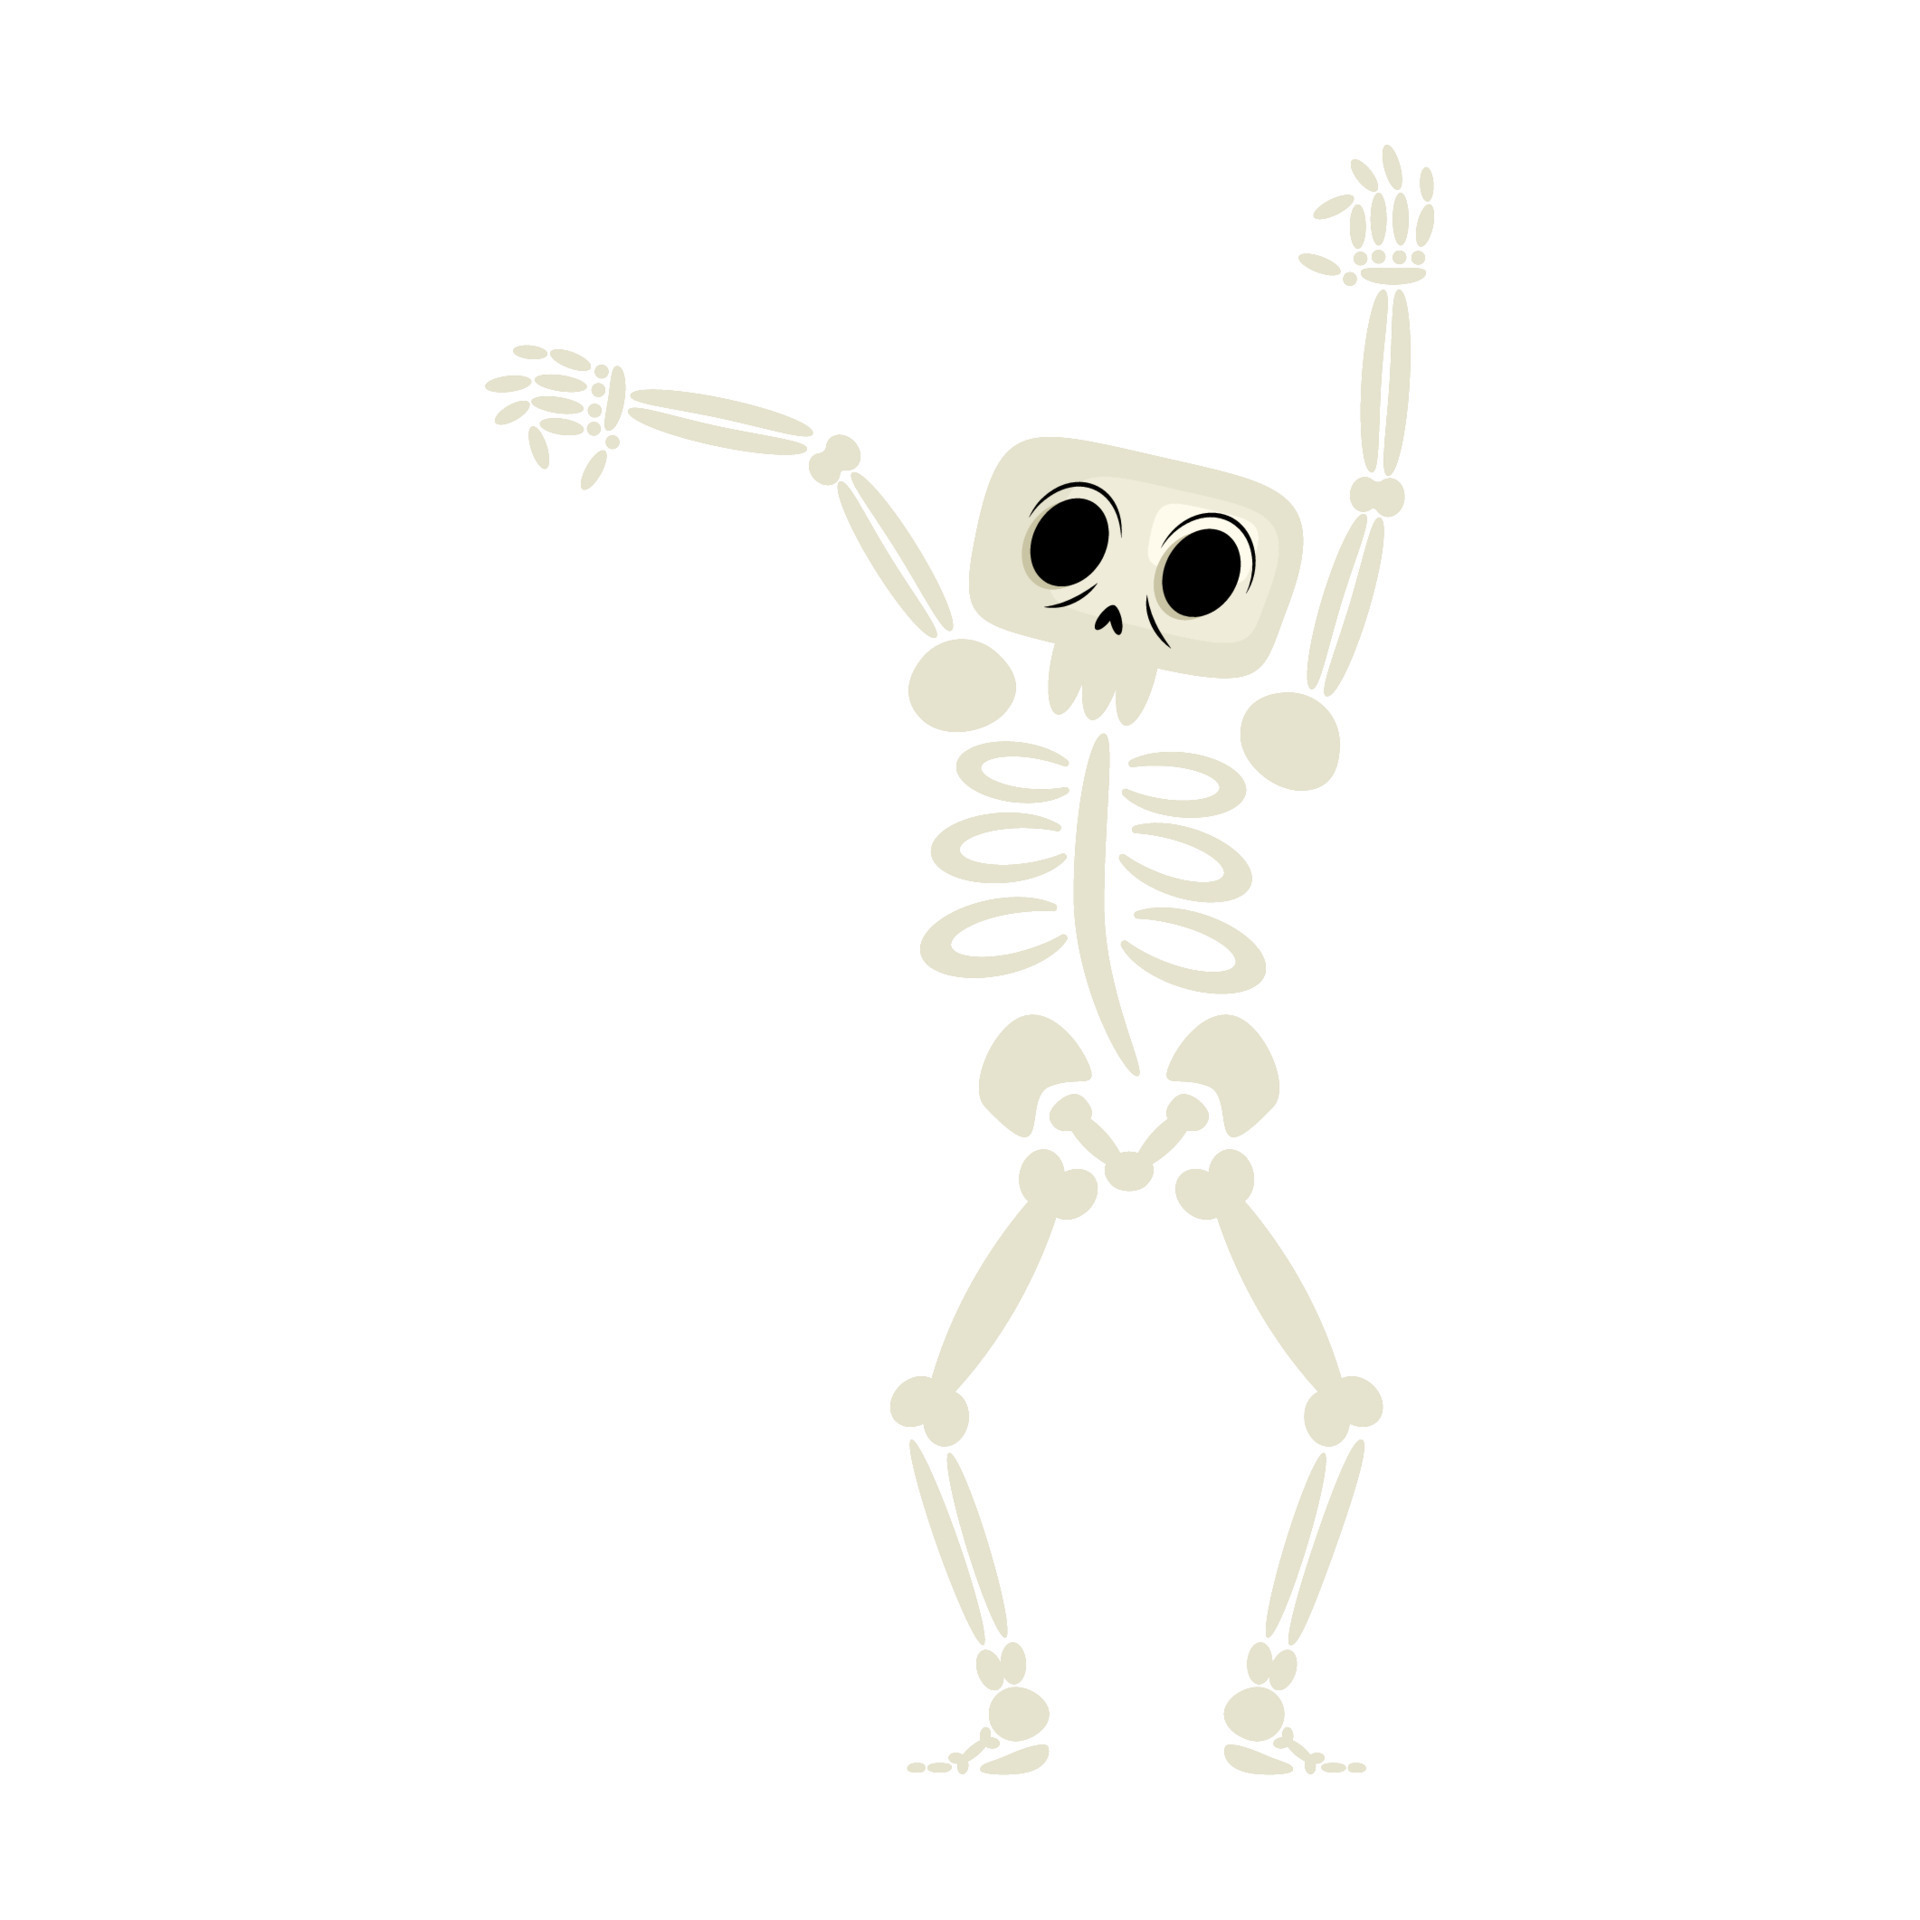 Skeleton Cartoon Vector Art, Icons, and Graphics for Free Download